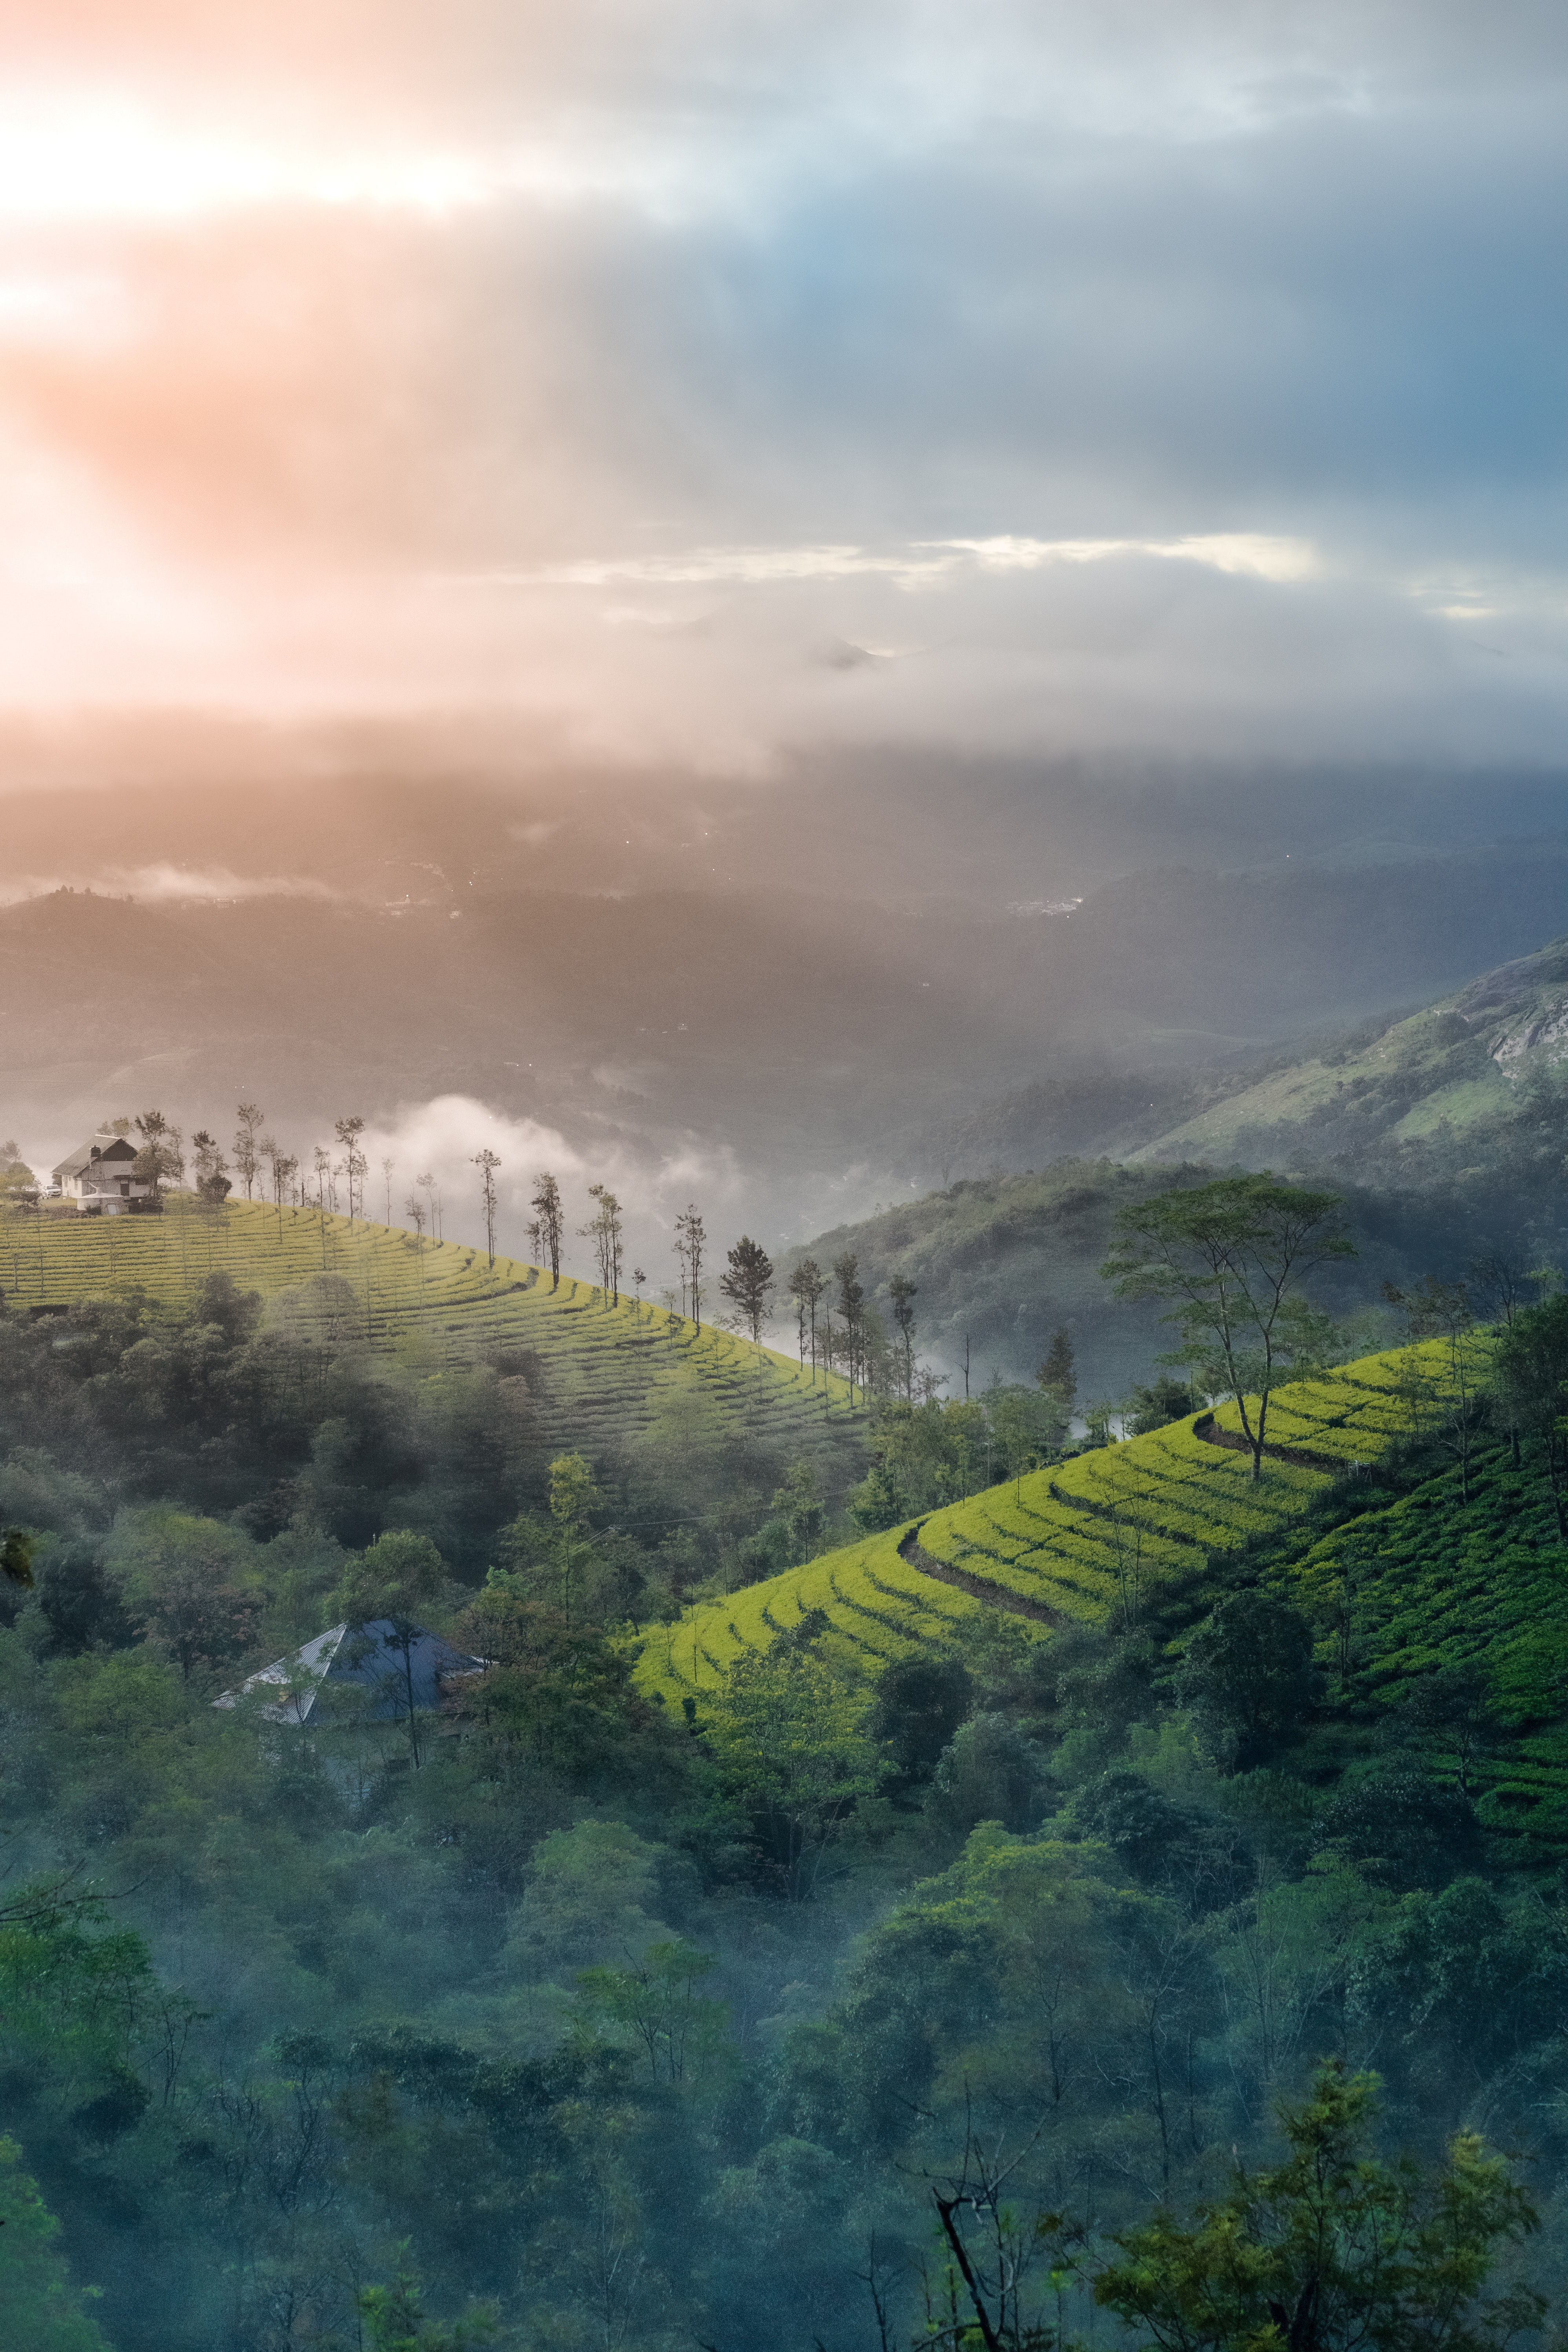 MUNNAR: THE HILL STATION OF KERALA, HIDDEN GEMS OF SOUTH INDIA